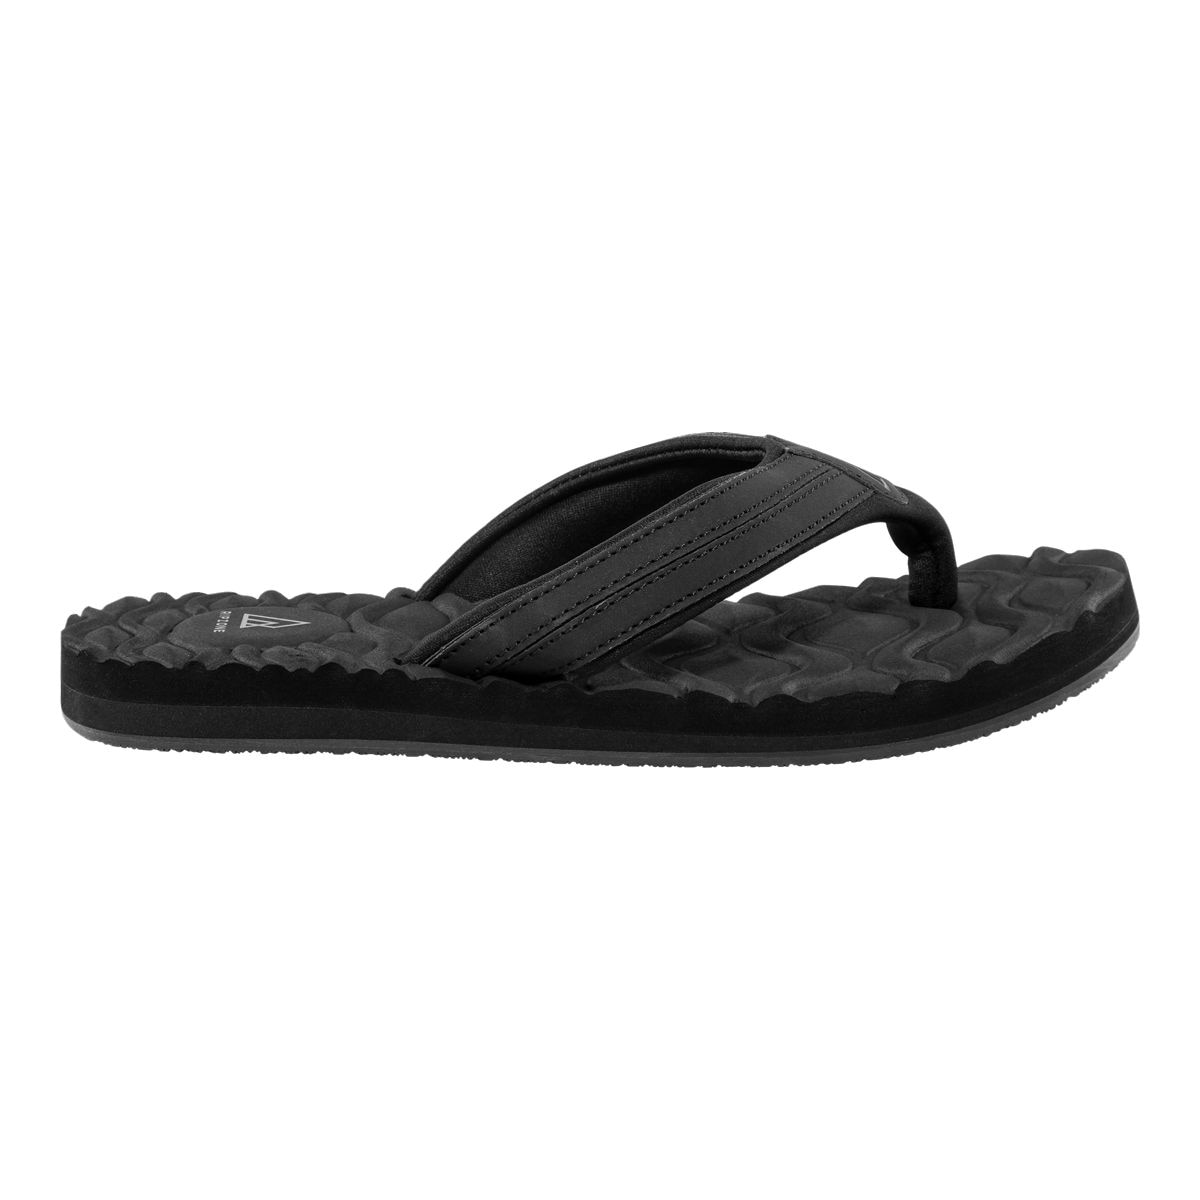 Image of Ripzone Women's Cushy Textile Lined Cushioned Flip Flop Sandals